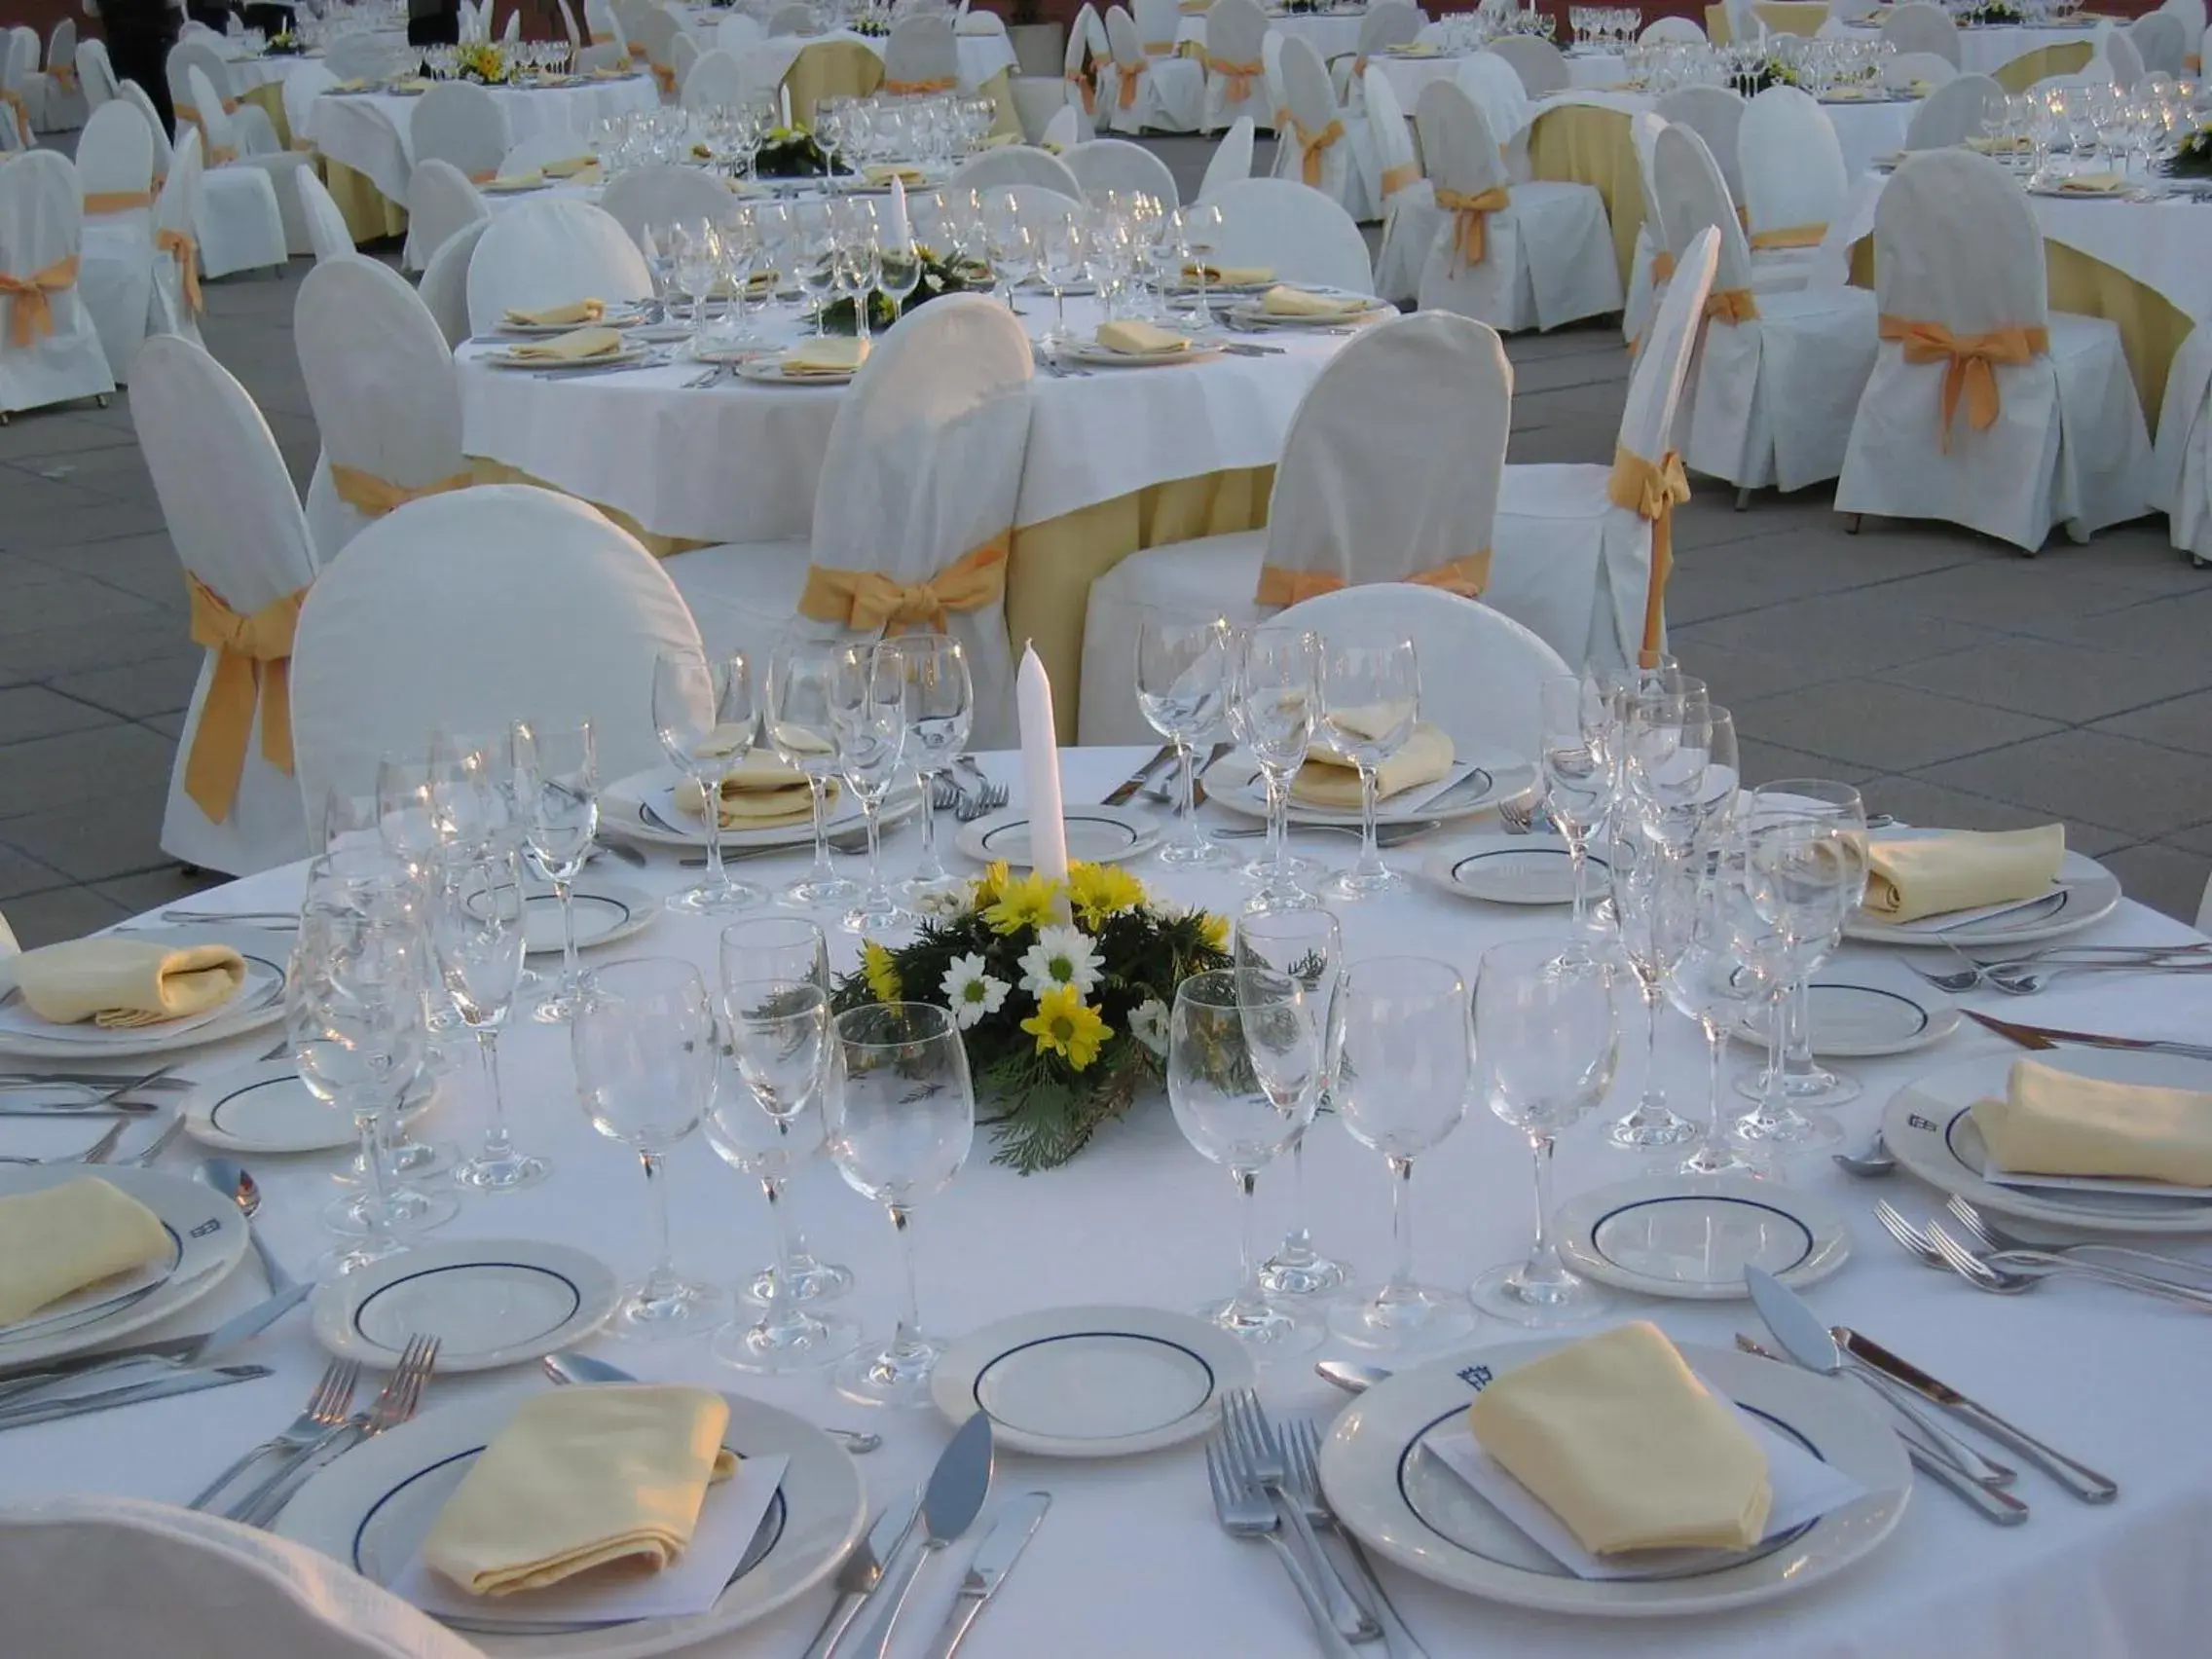 Day, Banquet Facilities in Extremadura Hotel